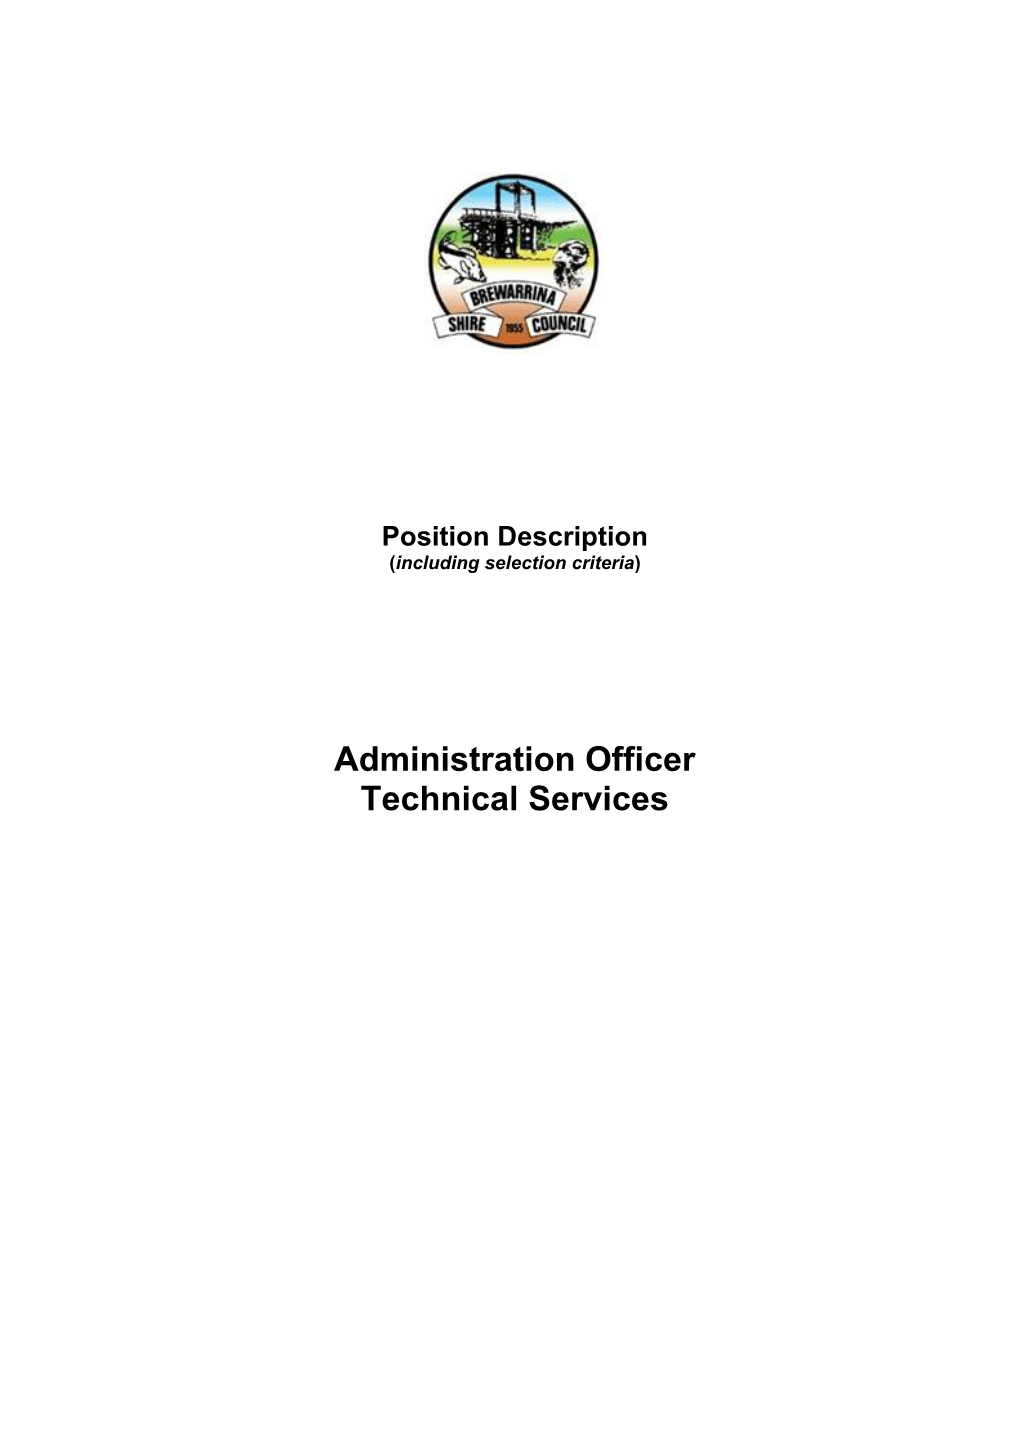 Position Description for Administration Officer Technical Services